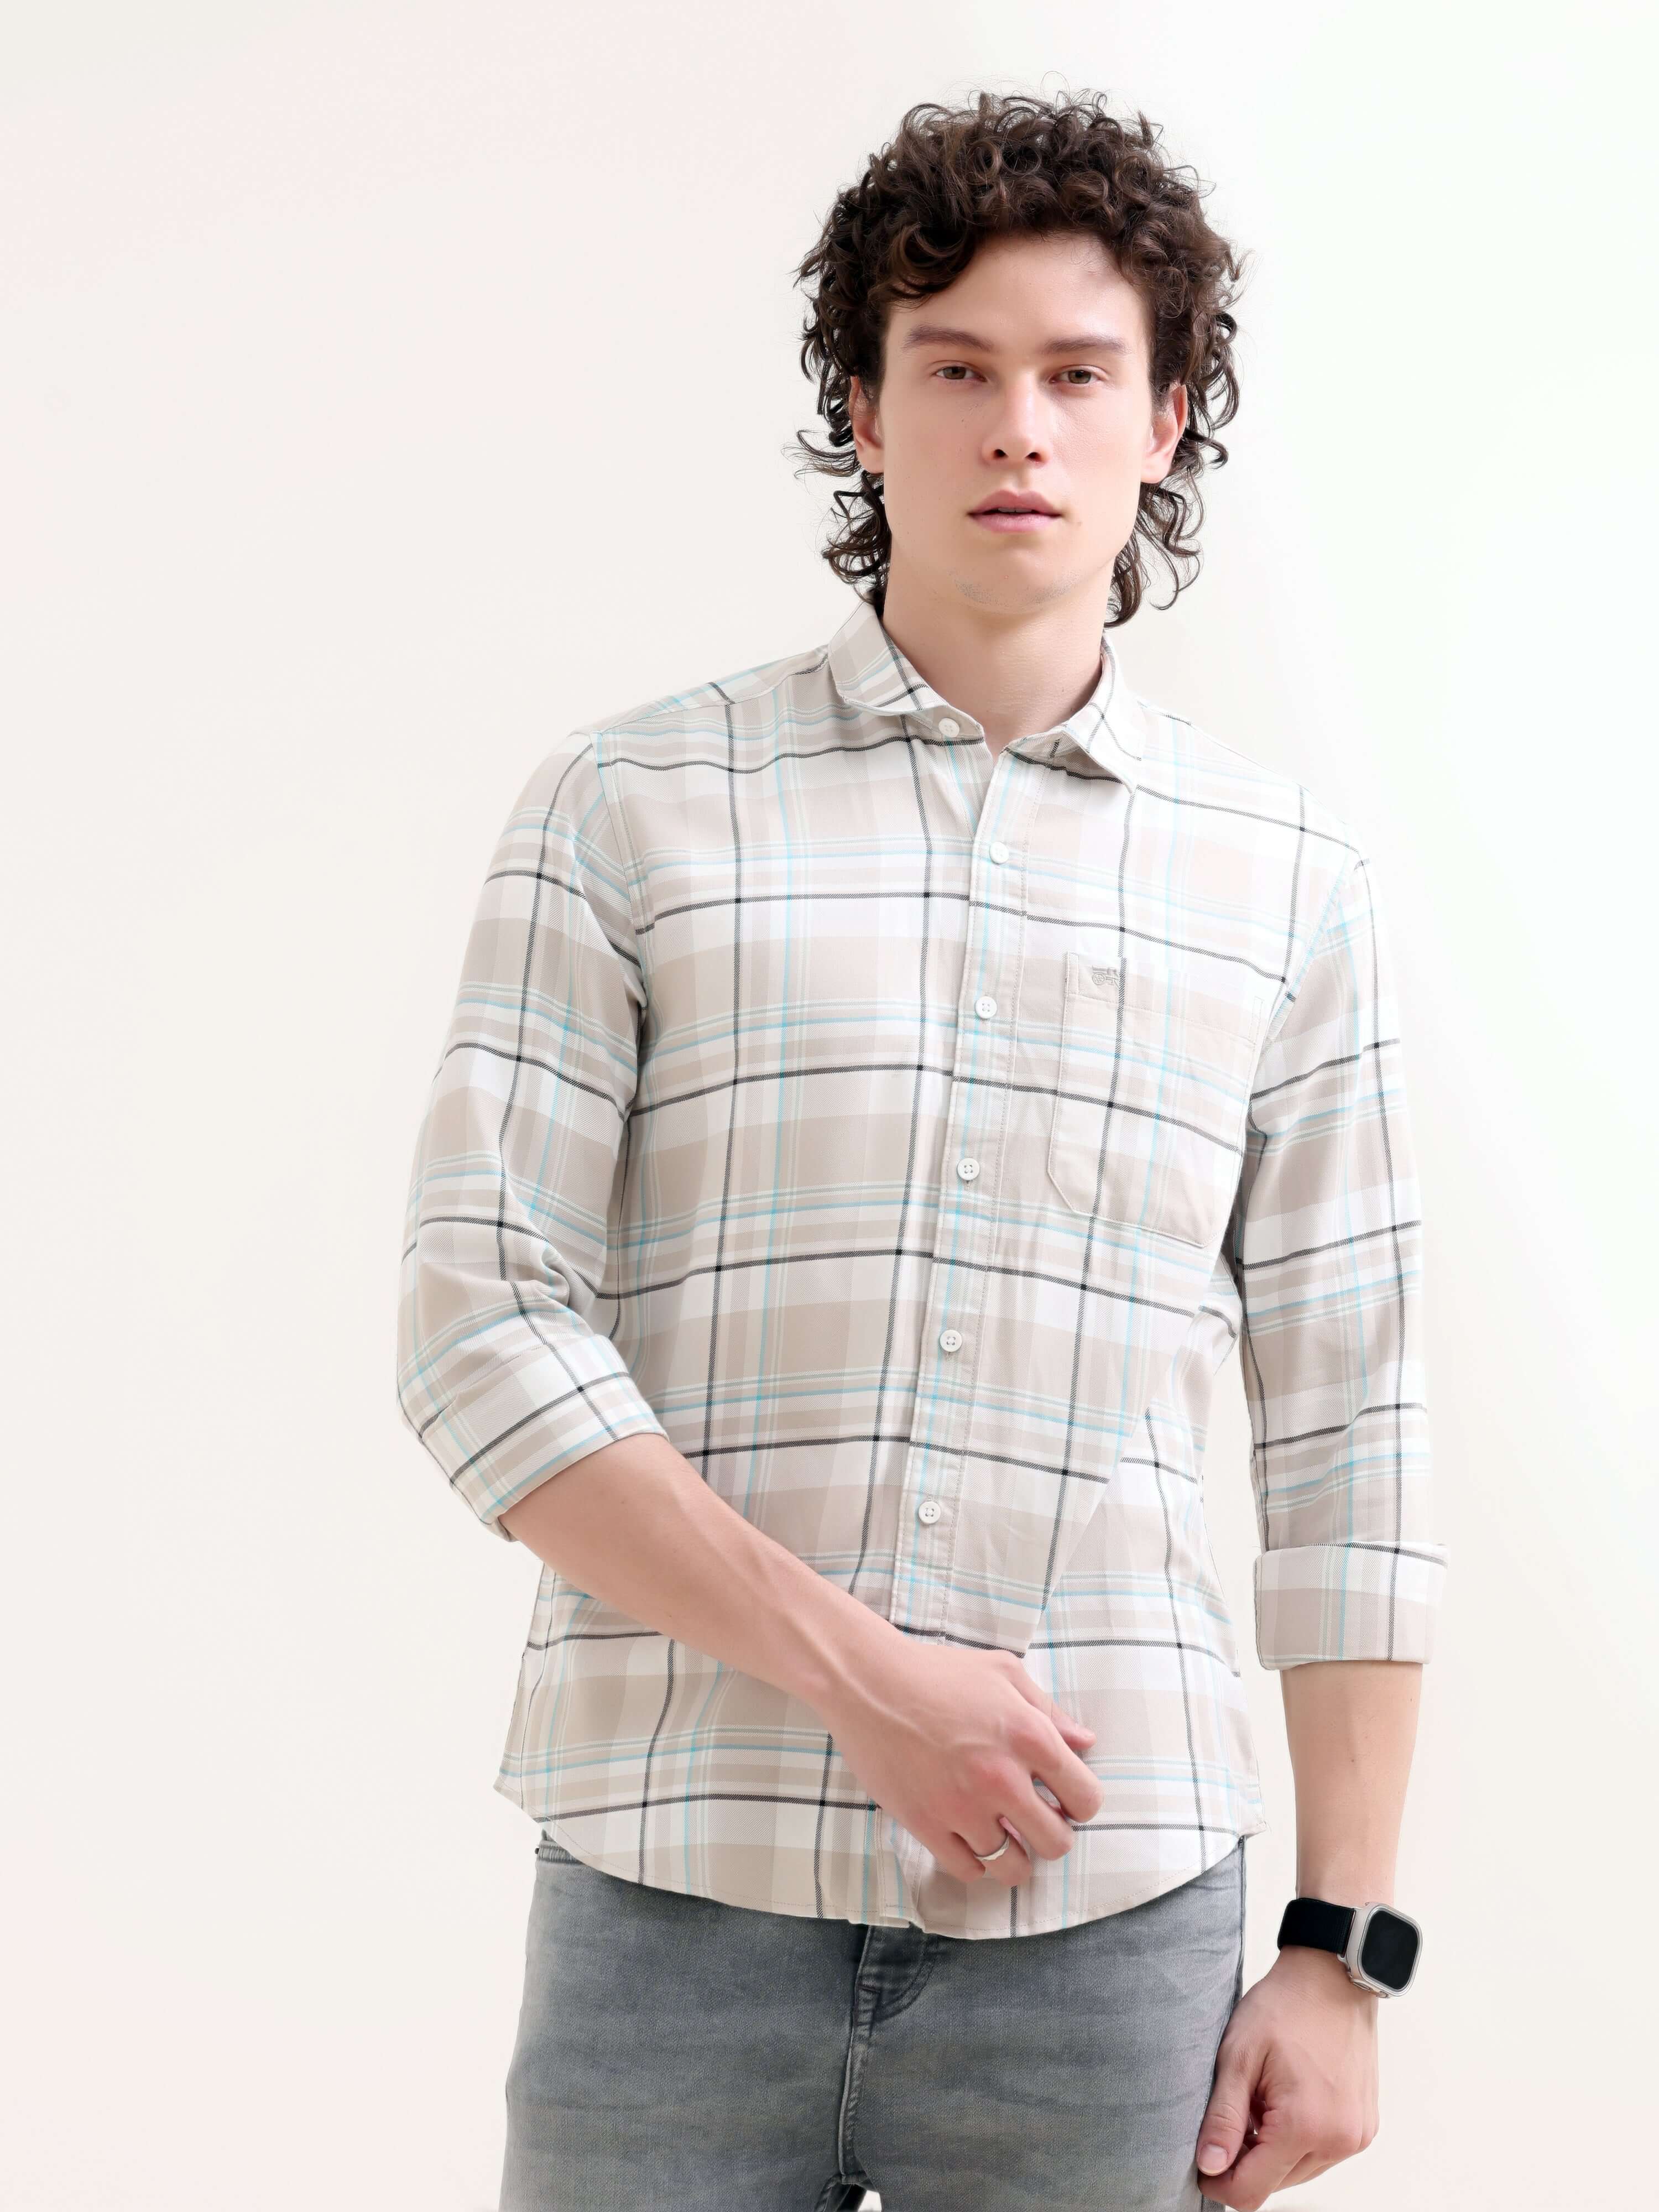 Cavour's Yarn-Dyed Check Shirt - New Men's Summer Look shop online at Estilocus. Discover elegance with our Cavour's beige check shirt. Perfect blend of classic style & modern fit for your summer wardrobe. Shop the new arrival!